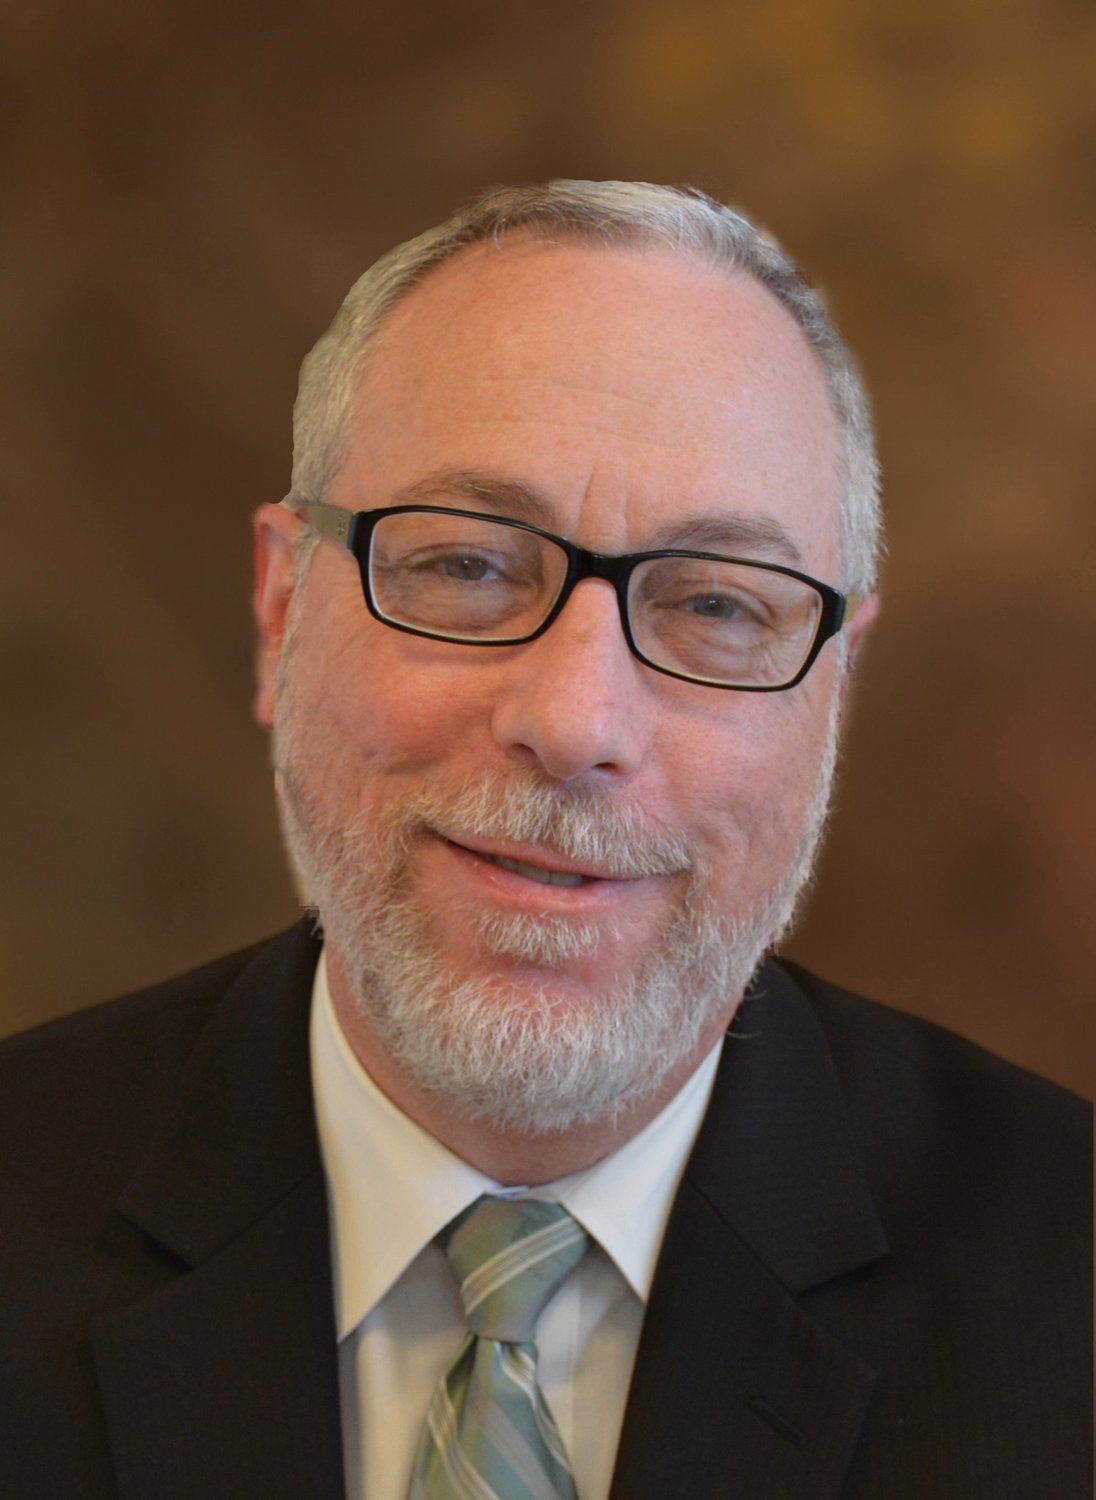 : Dr. Aaron E. Glatt, chair of the department of medicine and chief of infectious diseases at Mount Sinai South Nassau in Oceanside, earned the 2020 Laureate Award from the New York chapter of the American College of Physicians.